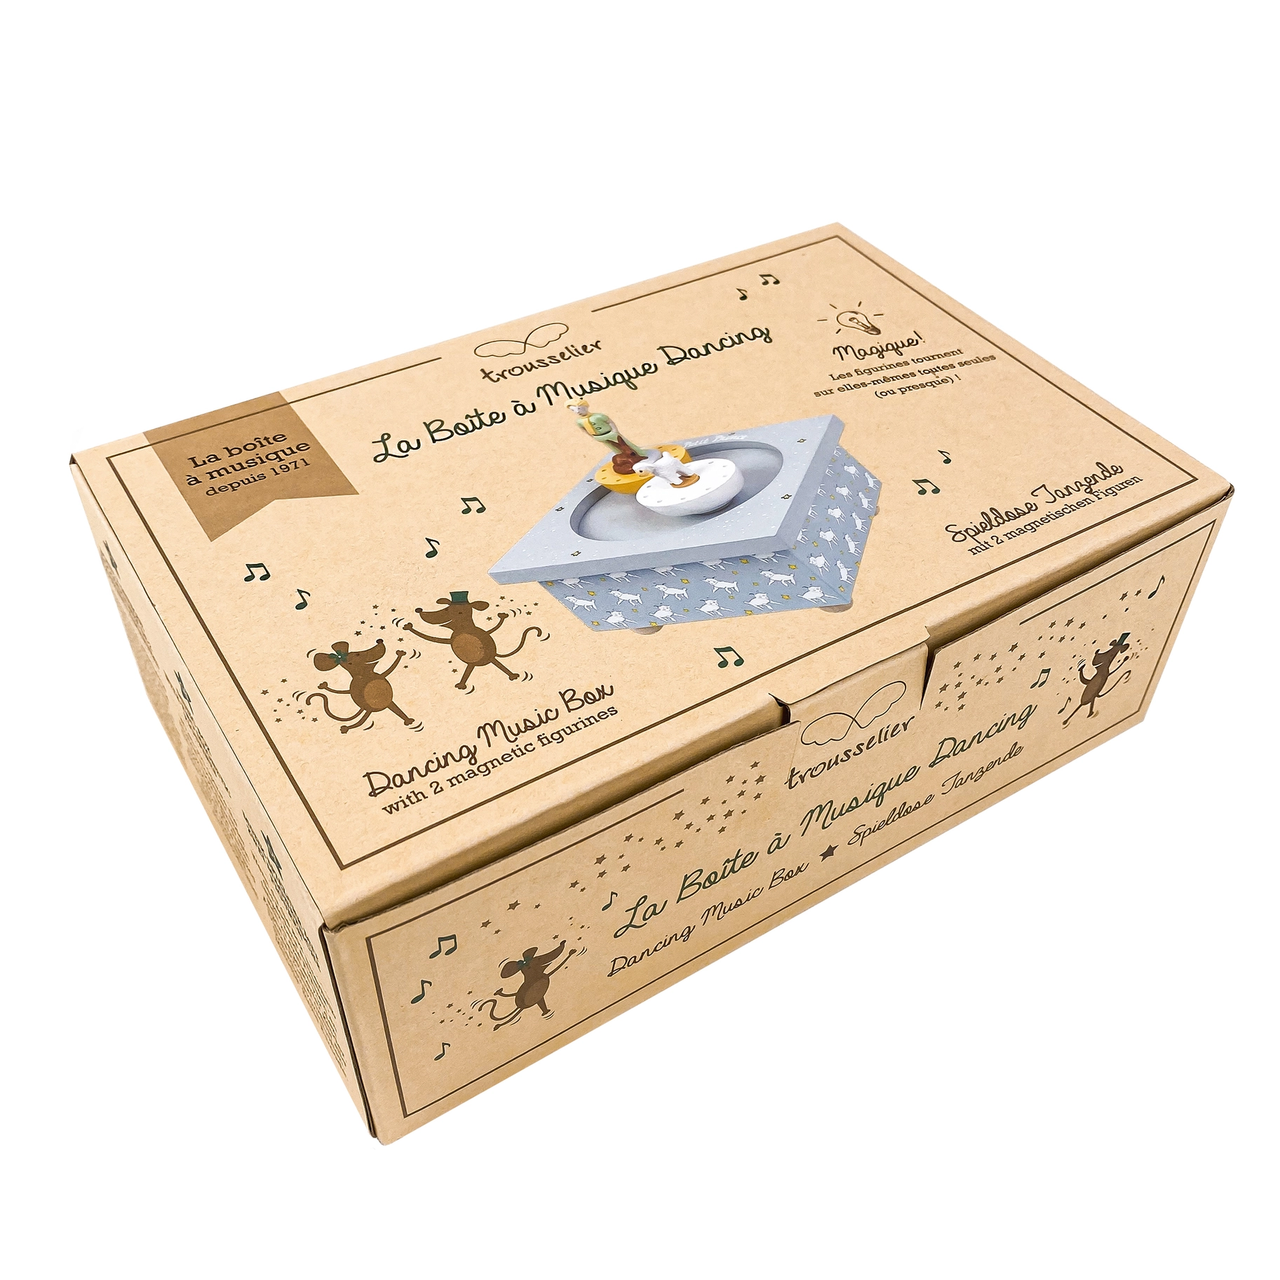 Music Box - Dancing The Little Prince - Sky Blue